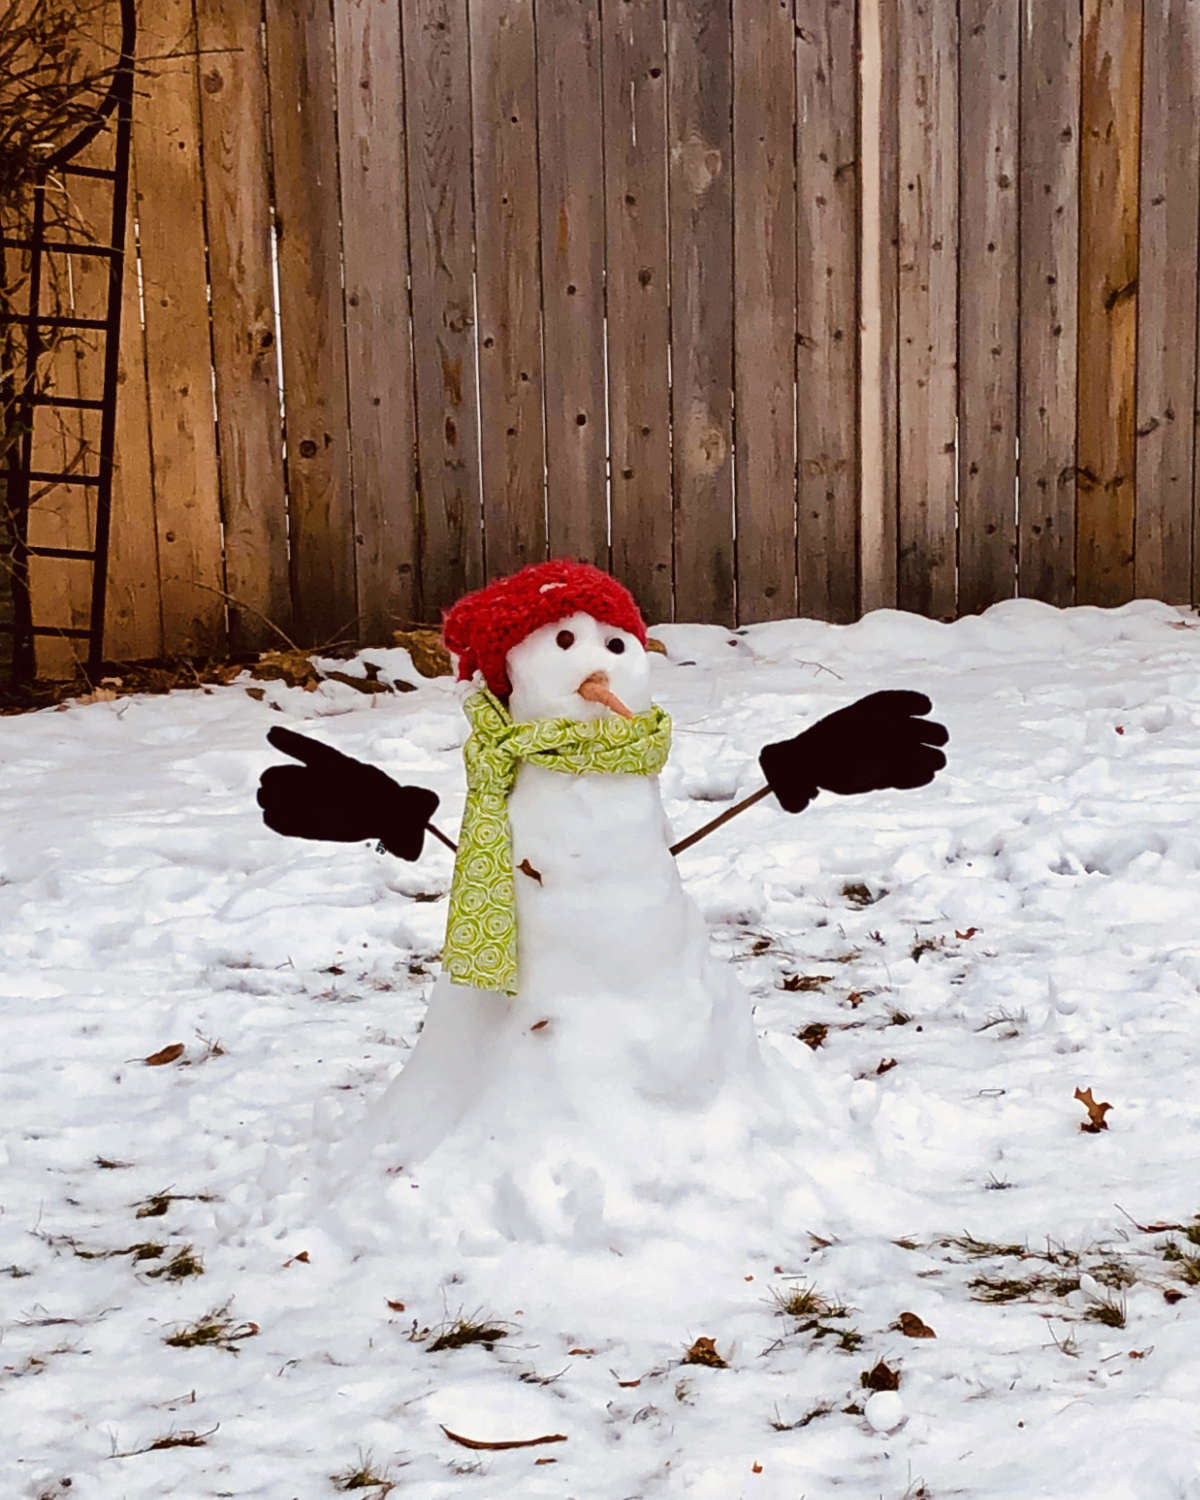 snowman with hat, scarf, and gloves